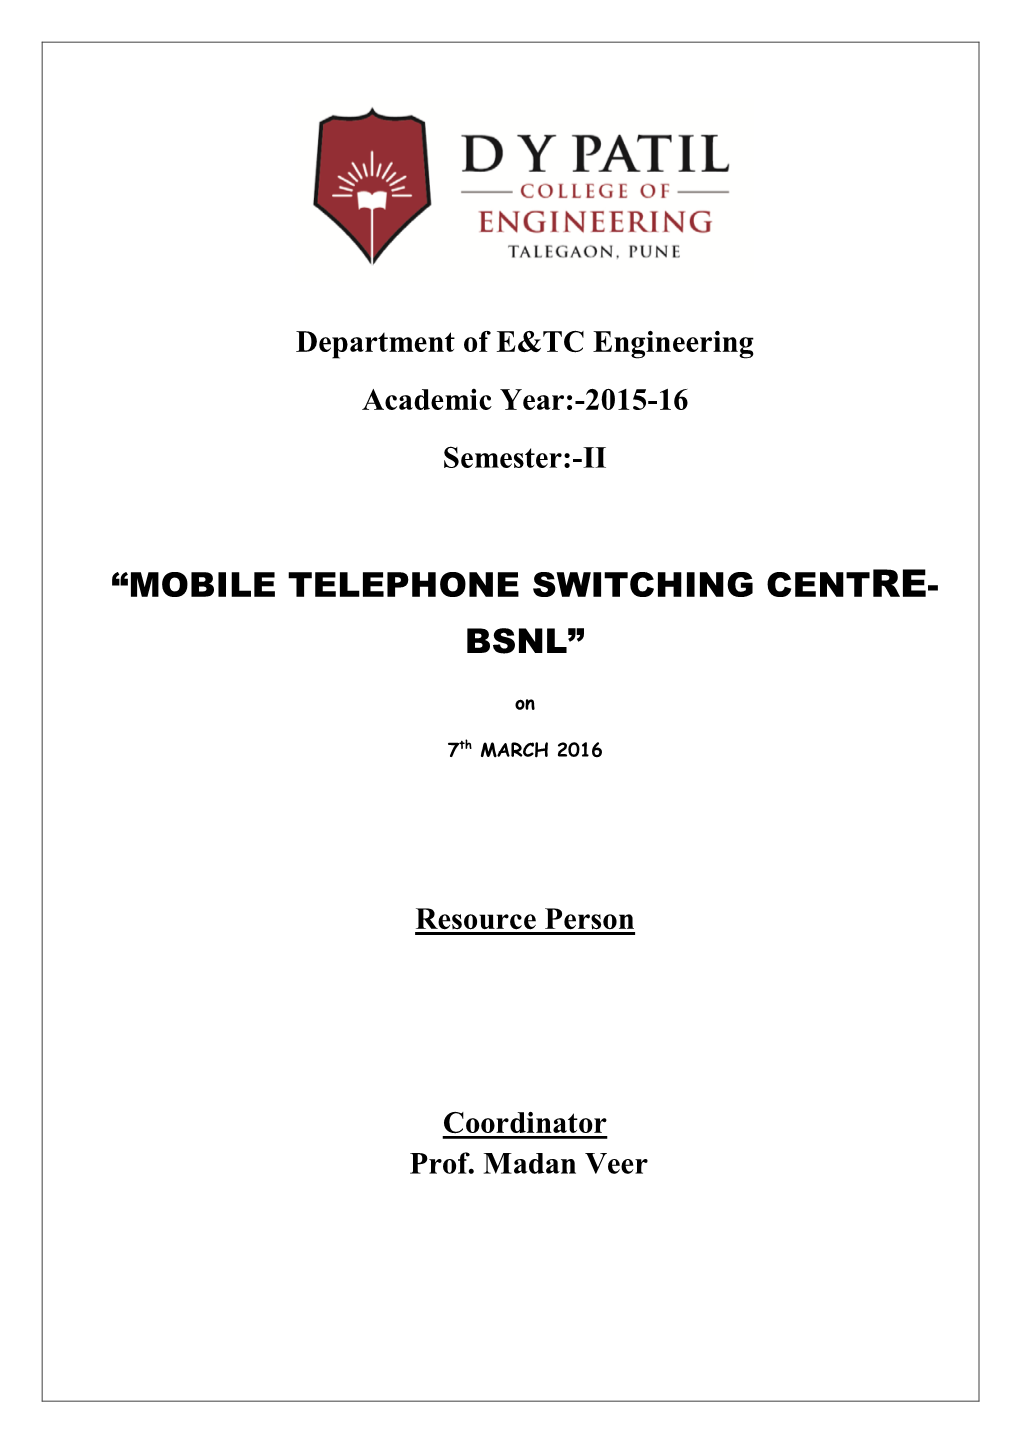 “Mobile Telephone Switching Centre- Bsnl”